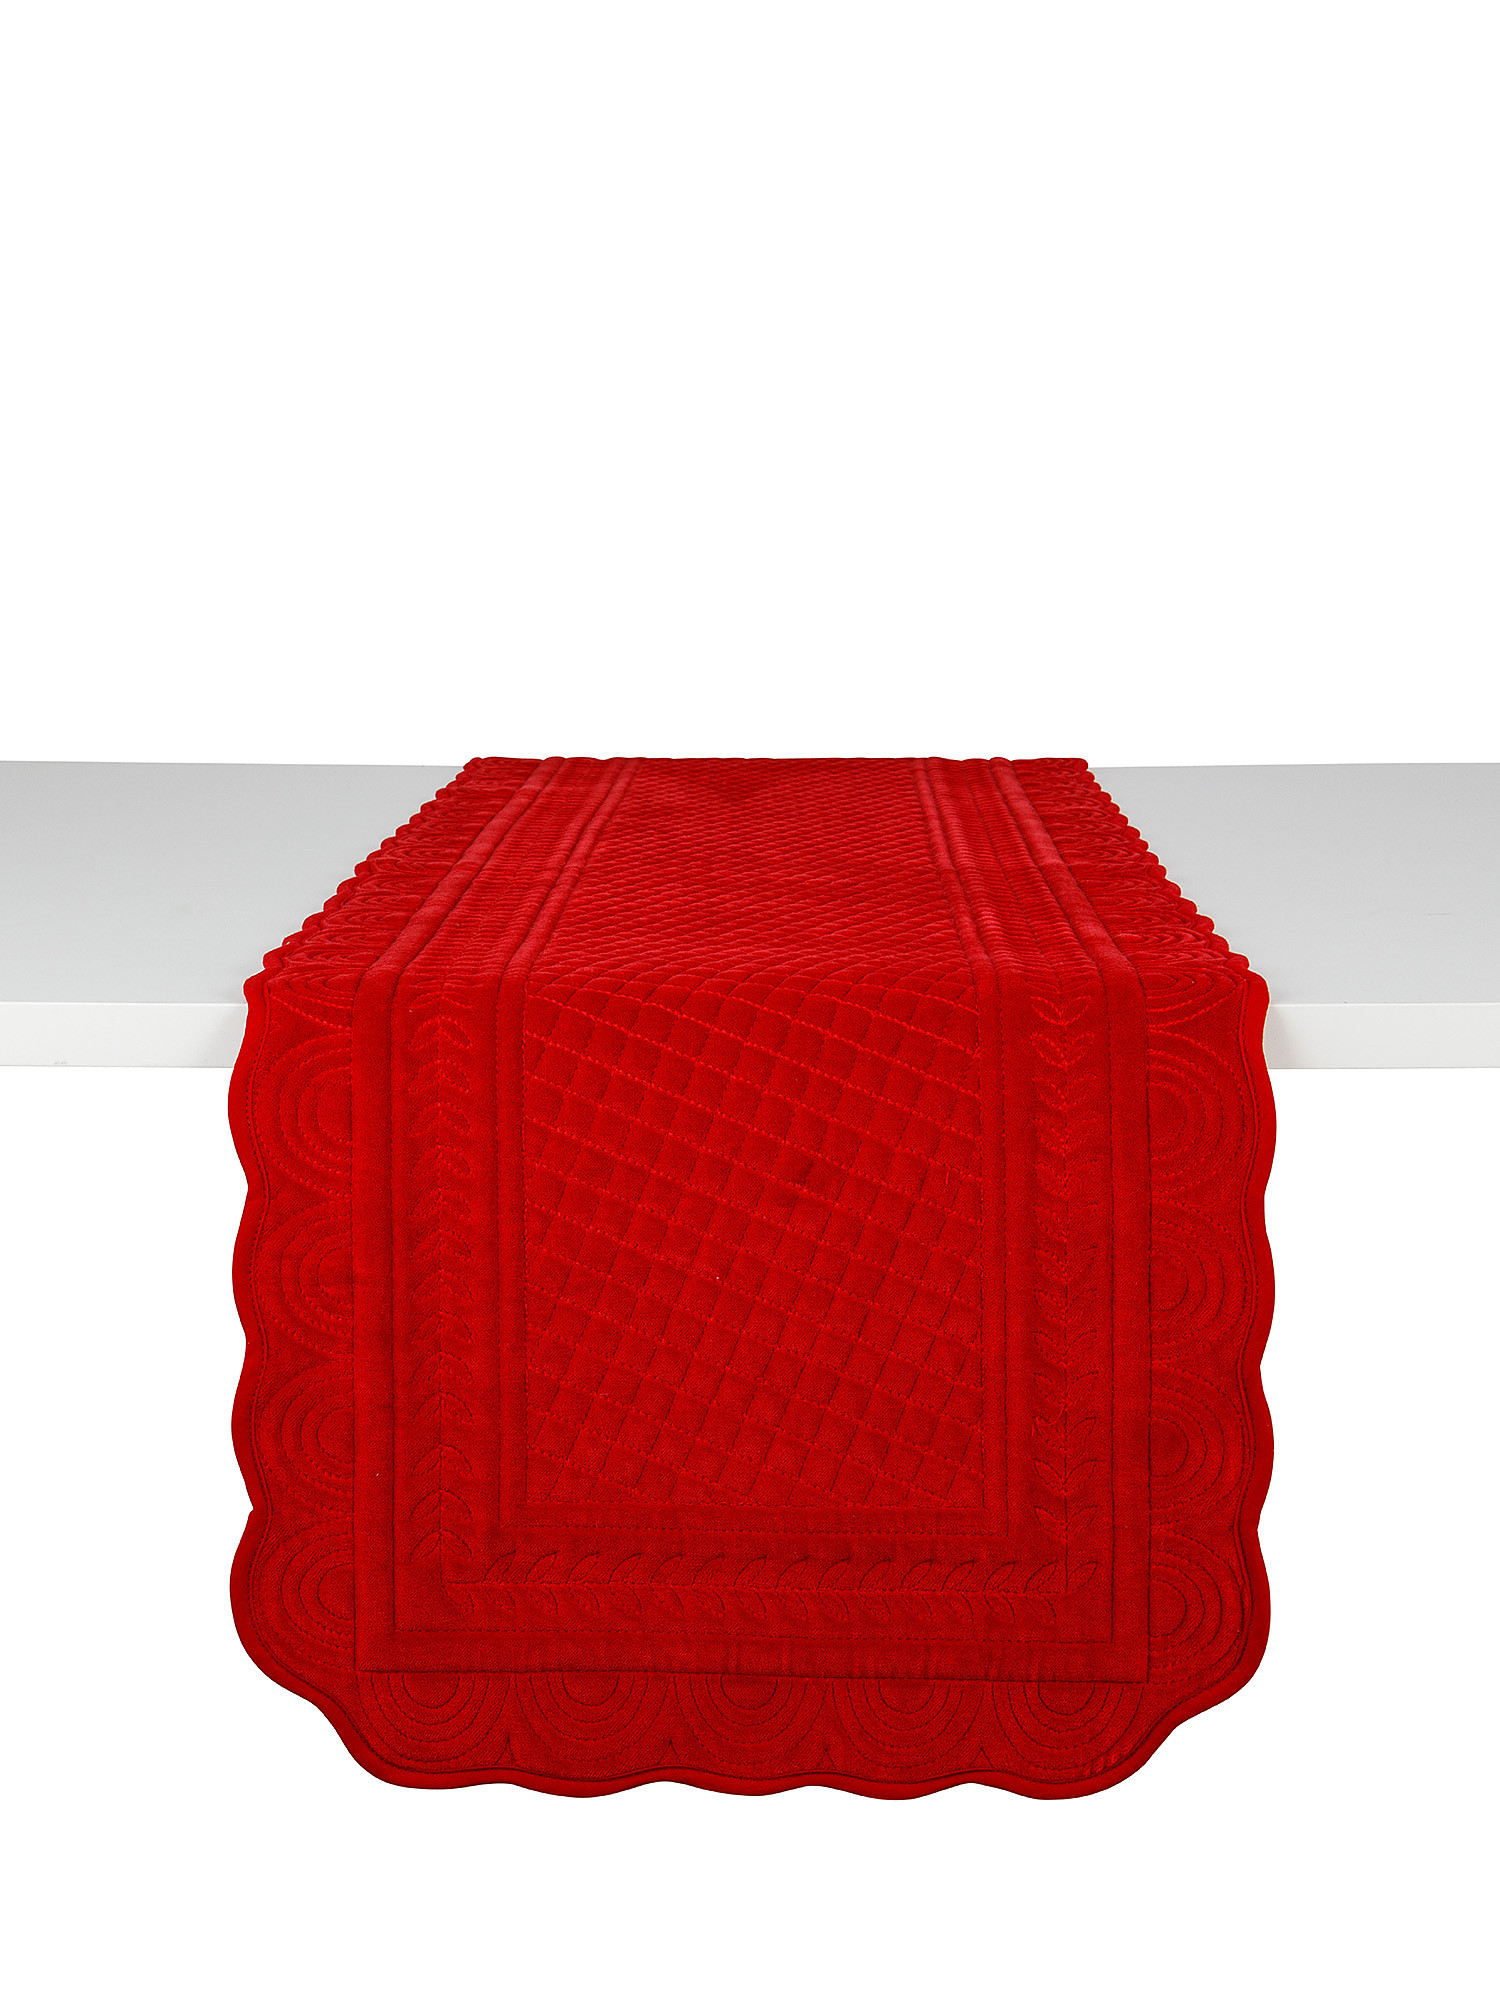 Plain color cotton velvet quilted placemat, Red, large image number 0